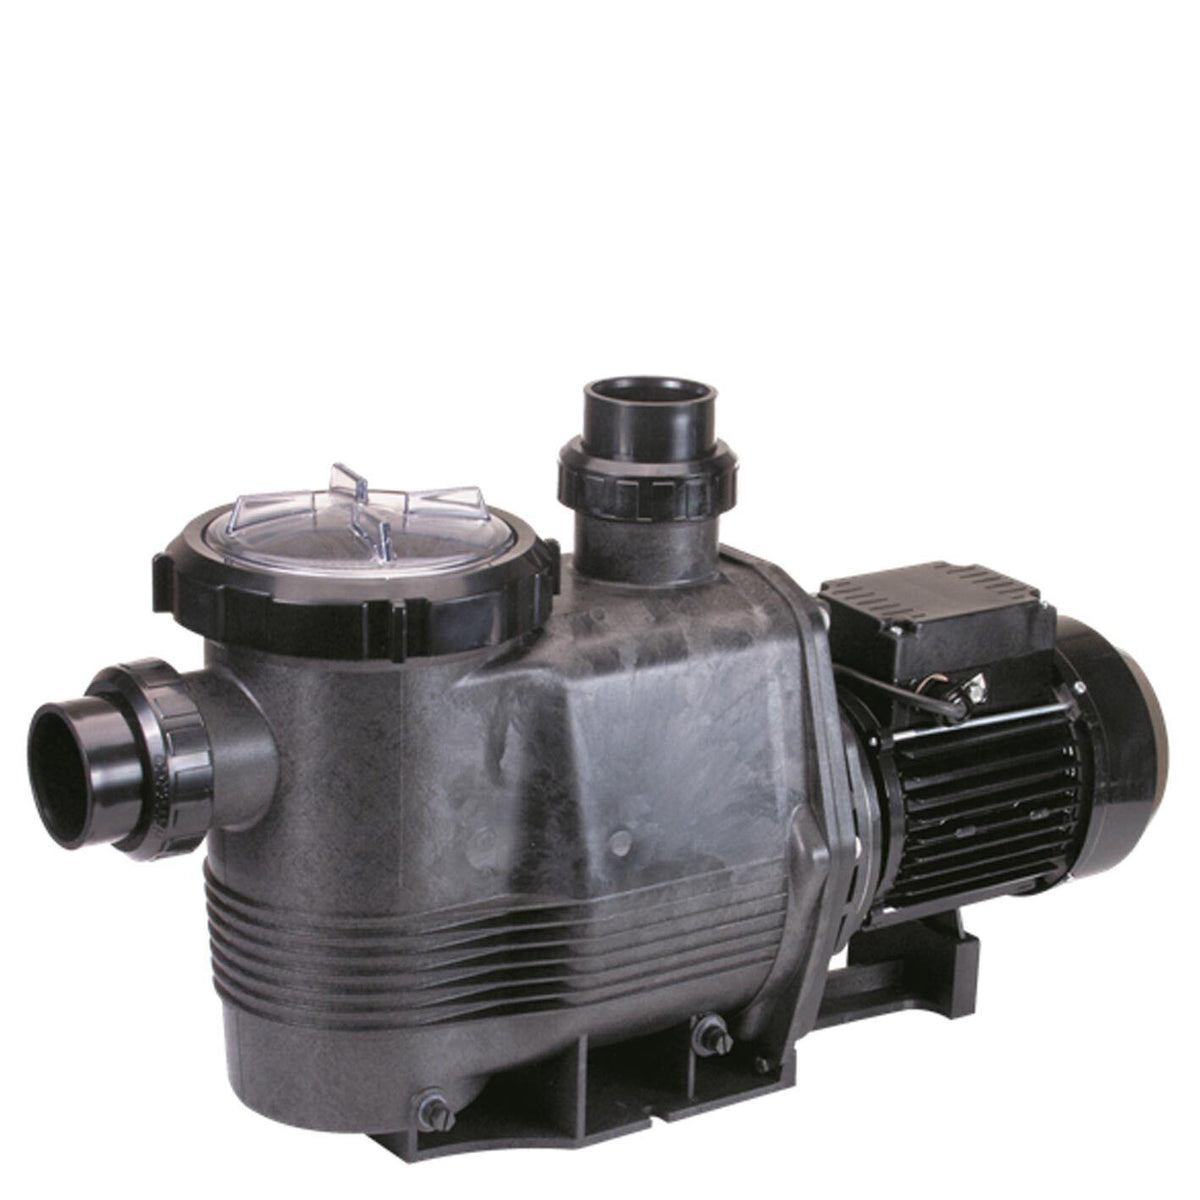 Waterco Hydrostorm Plus 250 Pump - Powerful and Efficient